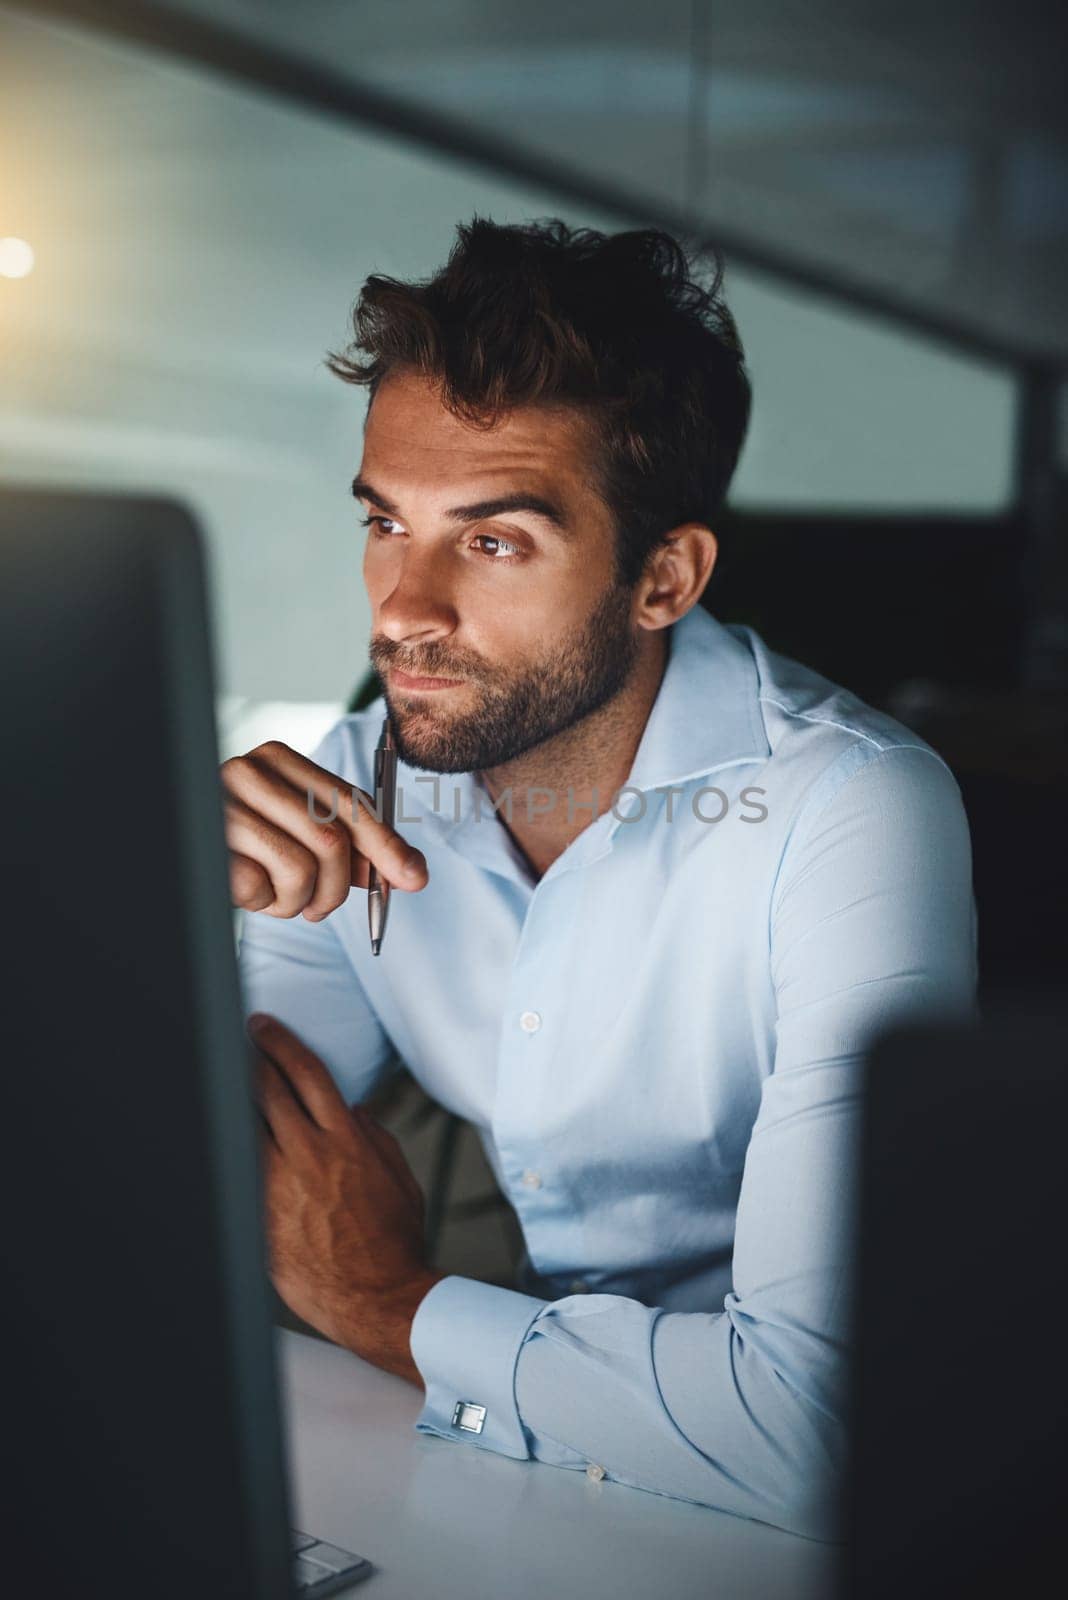 Serious, thinking and businessman with pen by computer for email, internet and working late in office for corporate career. Happiness, desk and lawyer with technology for communication in workspace.